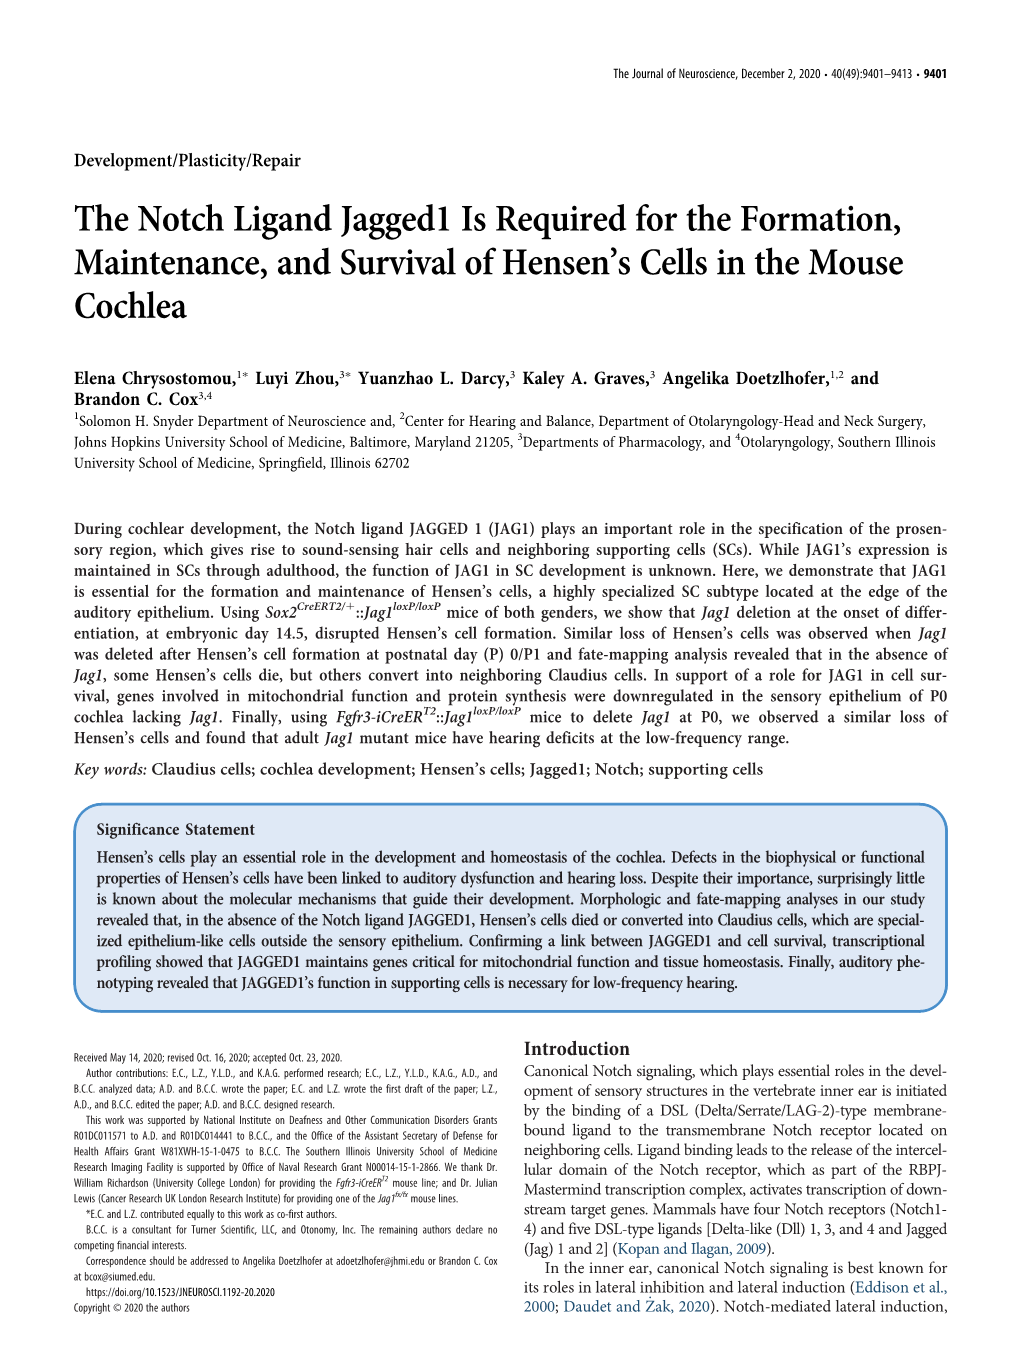 The Notch Ligand Jagged1 Is Required for the Formation, Maintenance, and Survival of Hensen’S Cells in the Mouse Cochlea